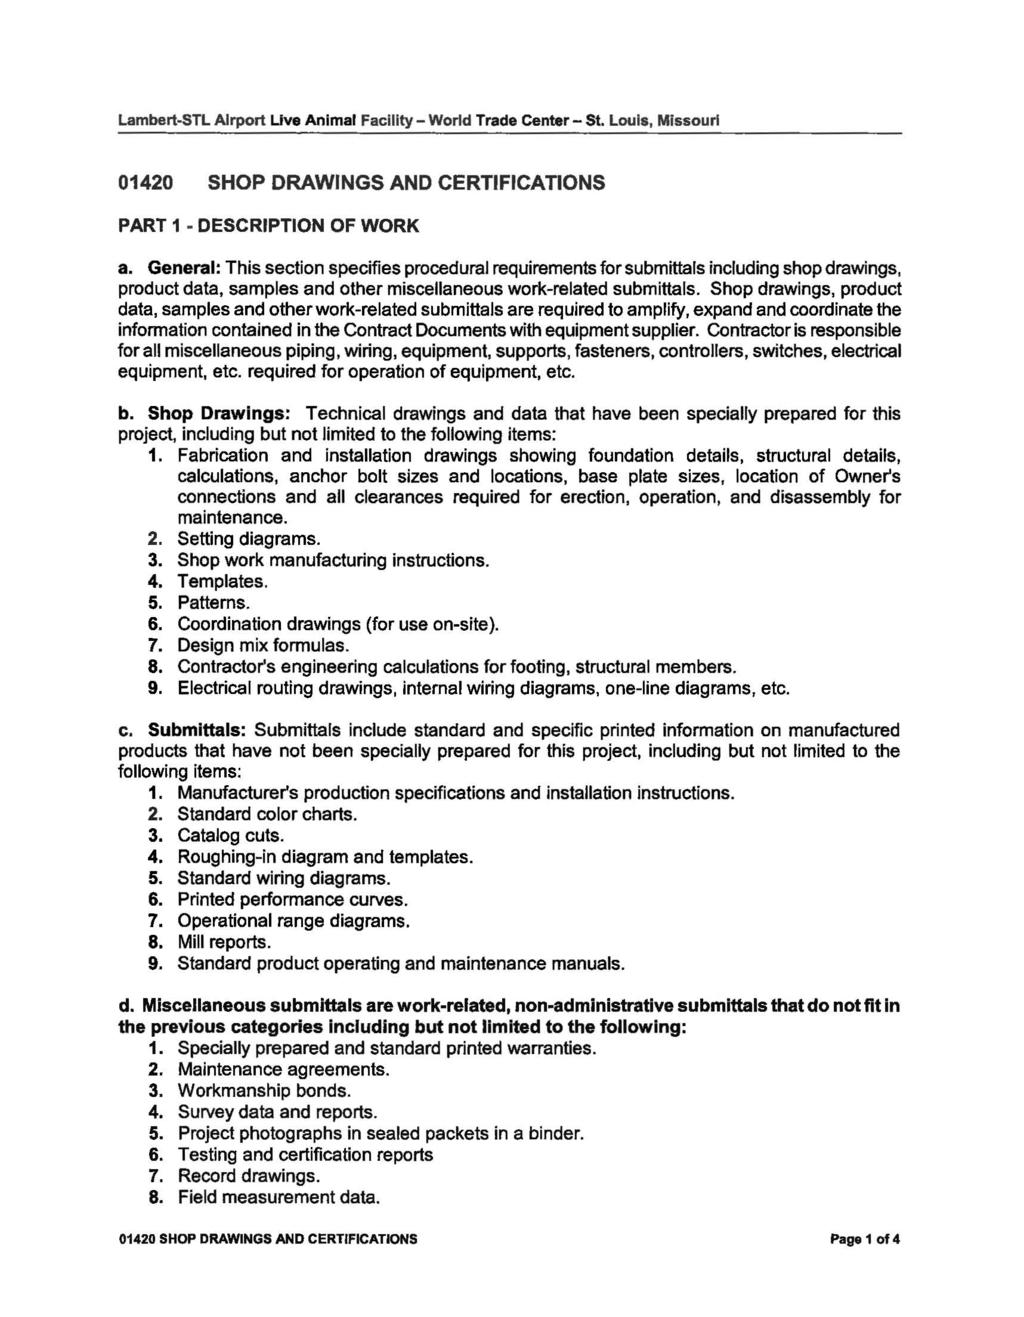 Lambert..STL Airport Uve Animal Facility -World Trade Center- St. Louis, Missouri 01420 SHOP DRAWINGS AND CERTIFICATIONS PART 1 DESCRIPTION OF WORK a.